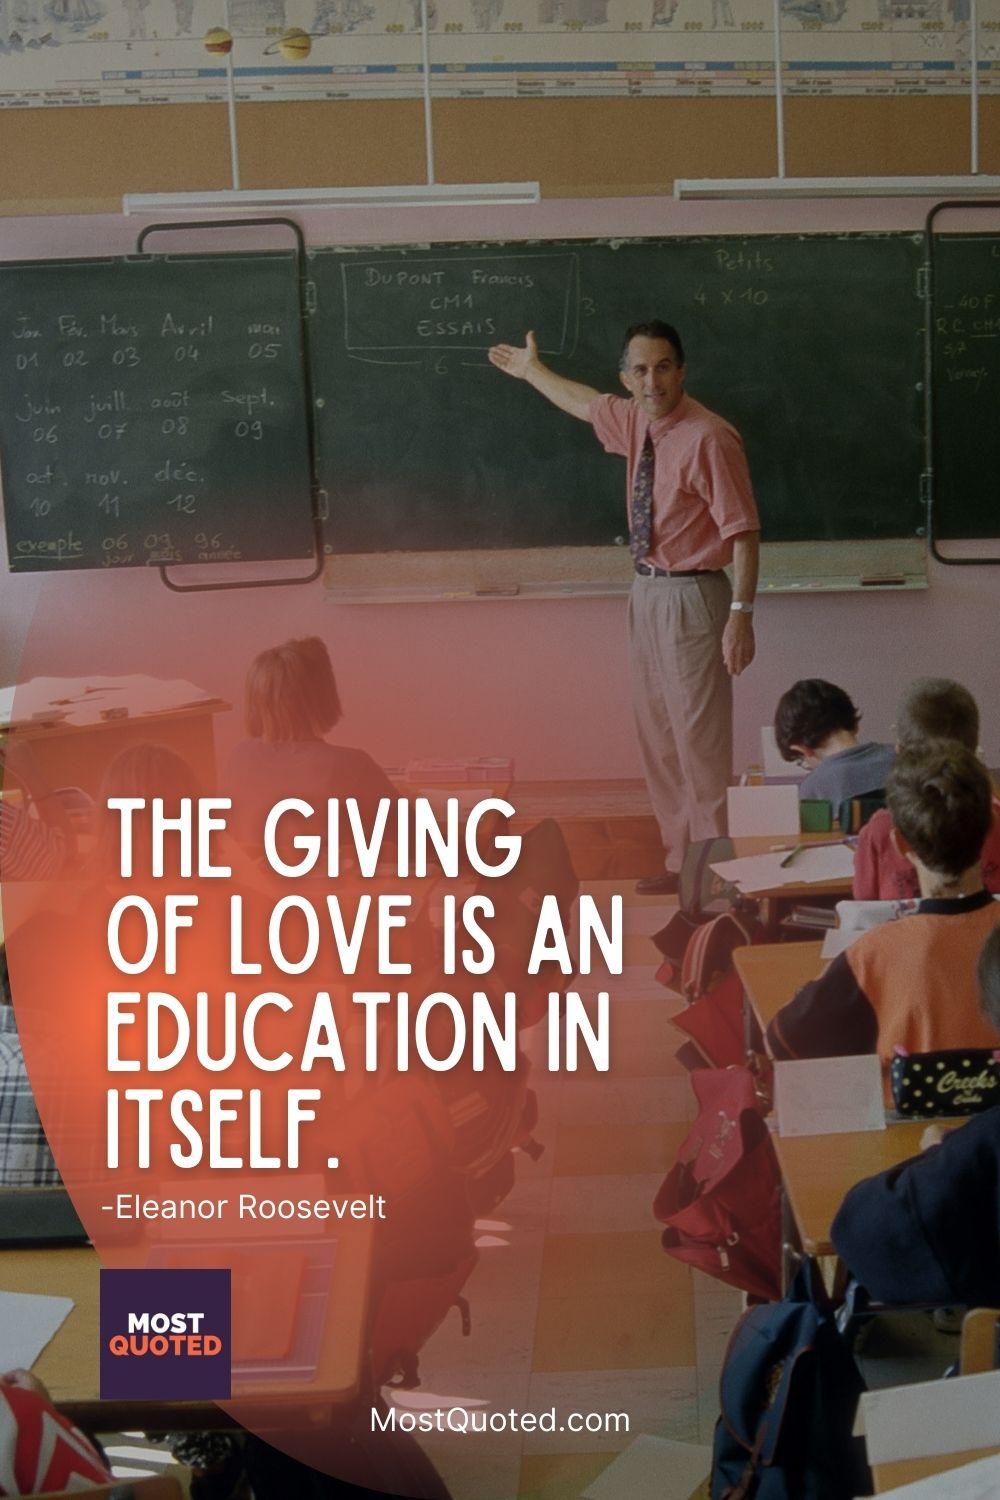 The giving of love is an education in itself. - Eleanor Roosevelt